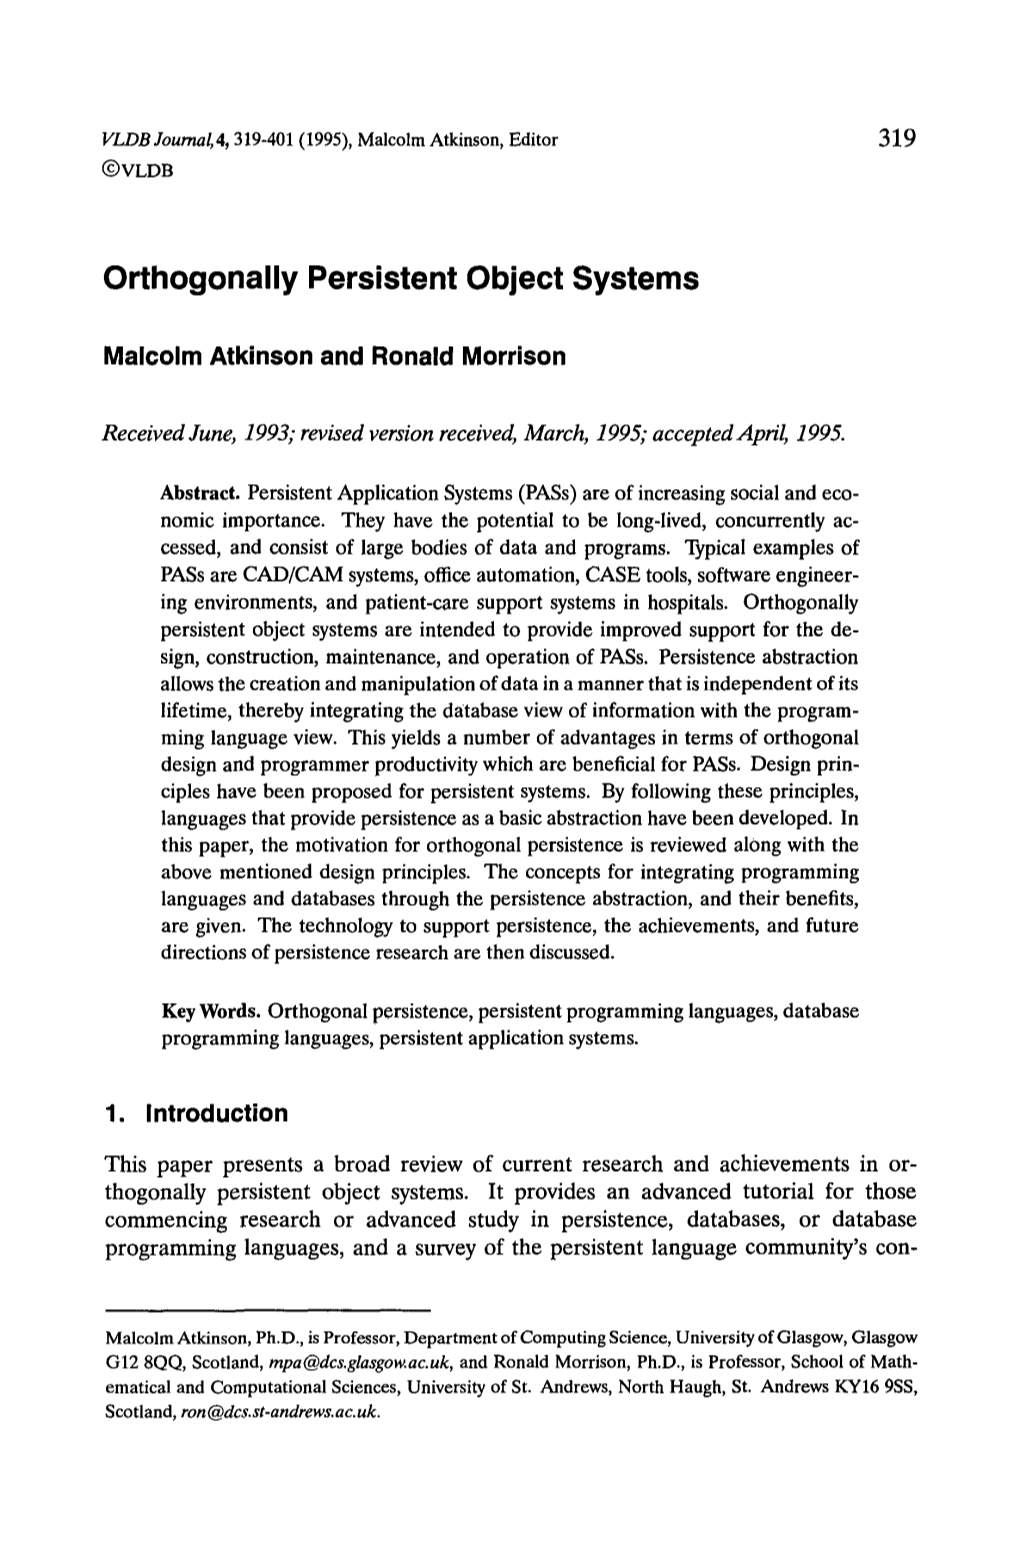 Orthogonally Persistent Object Systems